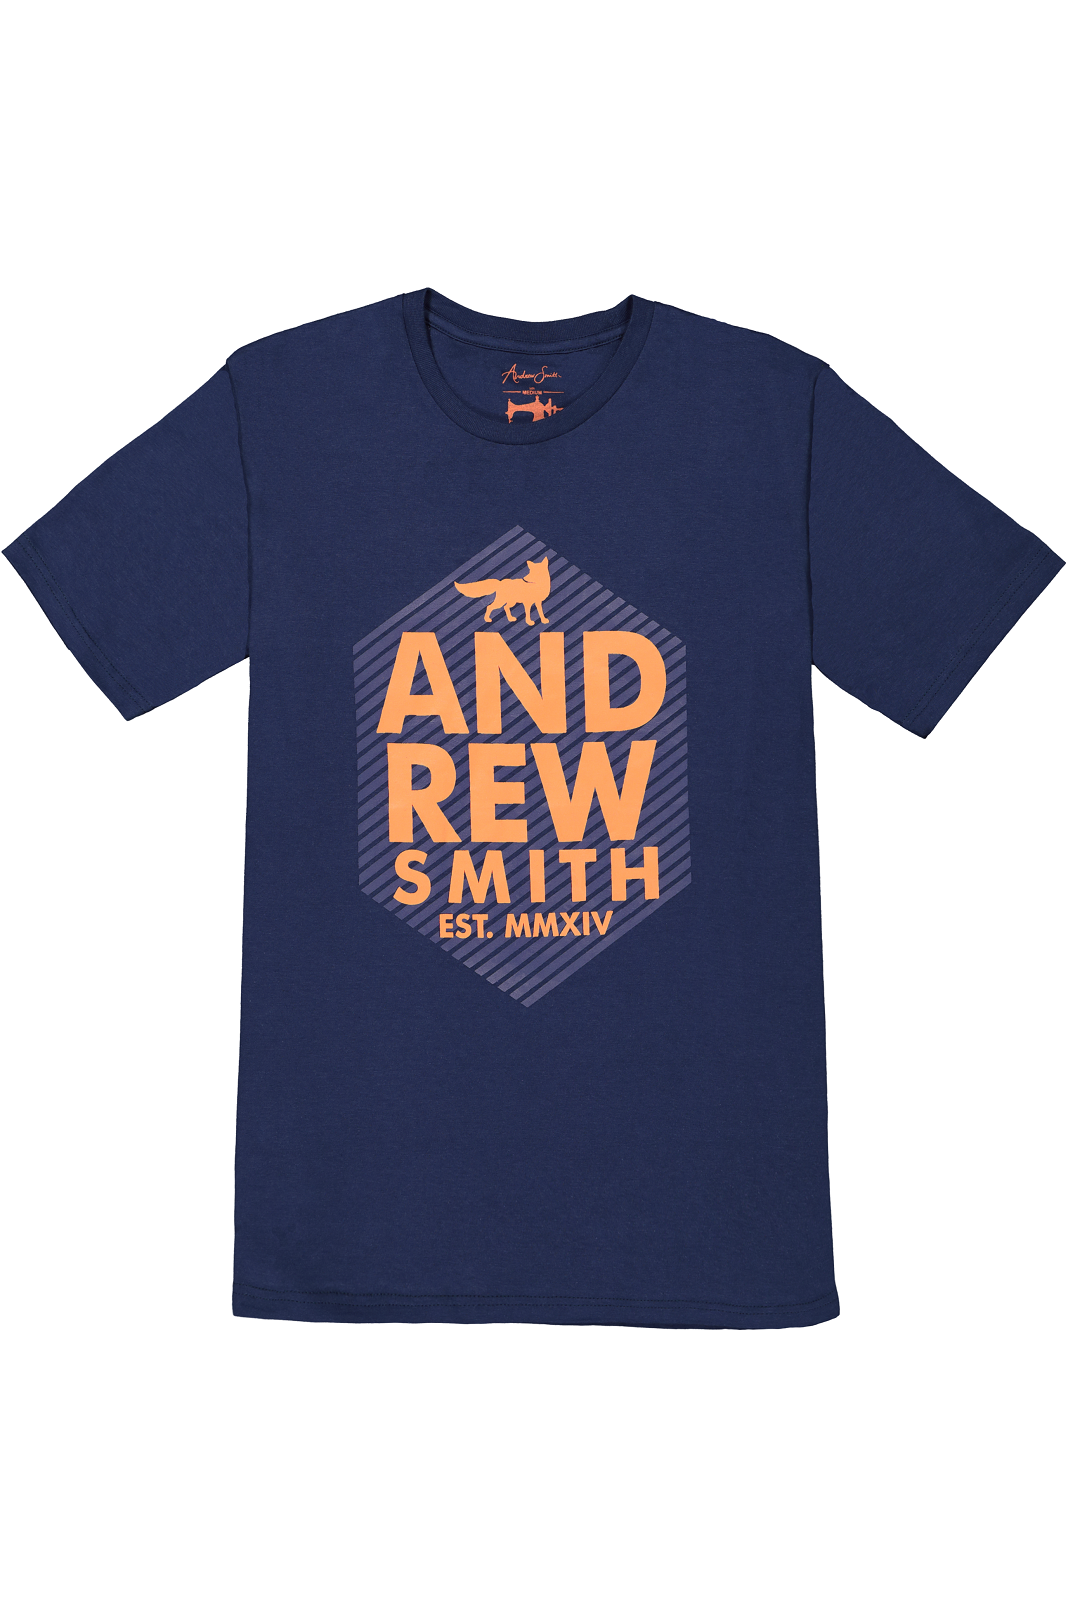 Andrew Smith T-Shirt Slim Fit Pria A0113X02H